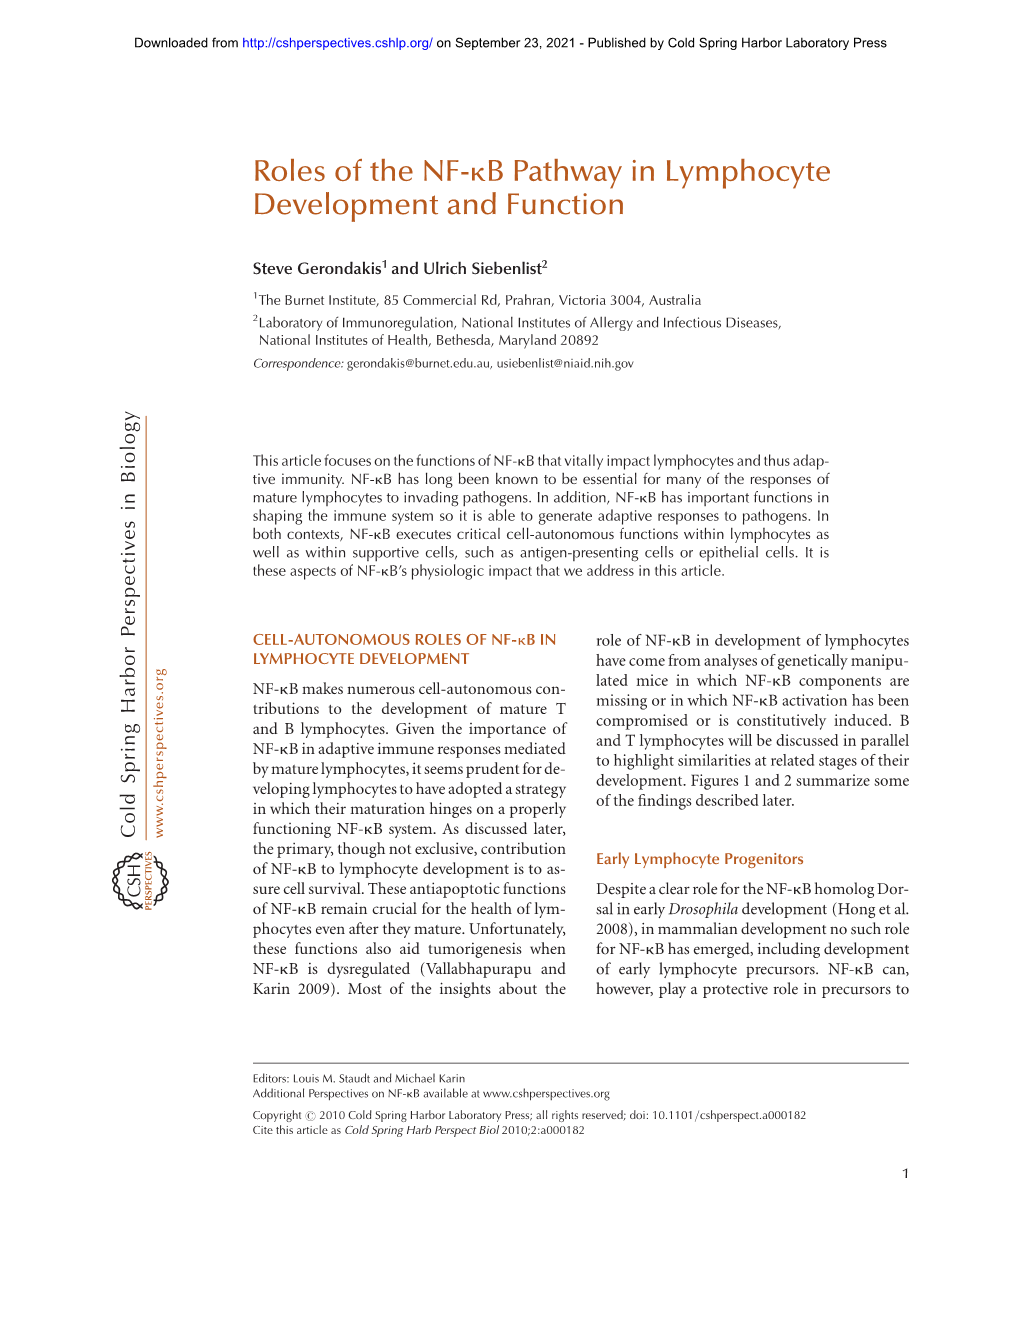 Roles of the NF-Kb Pathway in Lymphocyte Development and Function